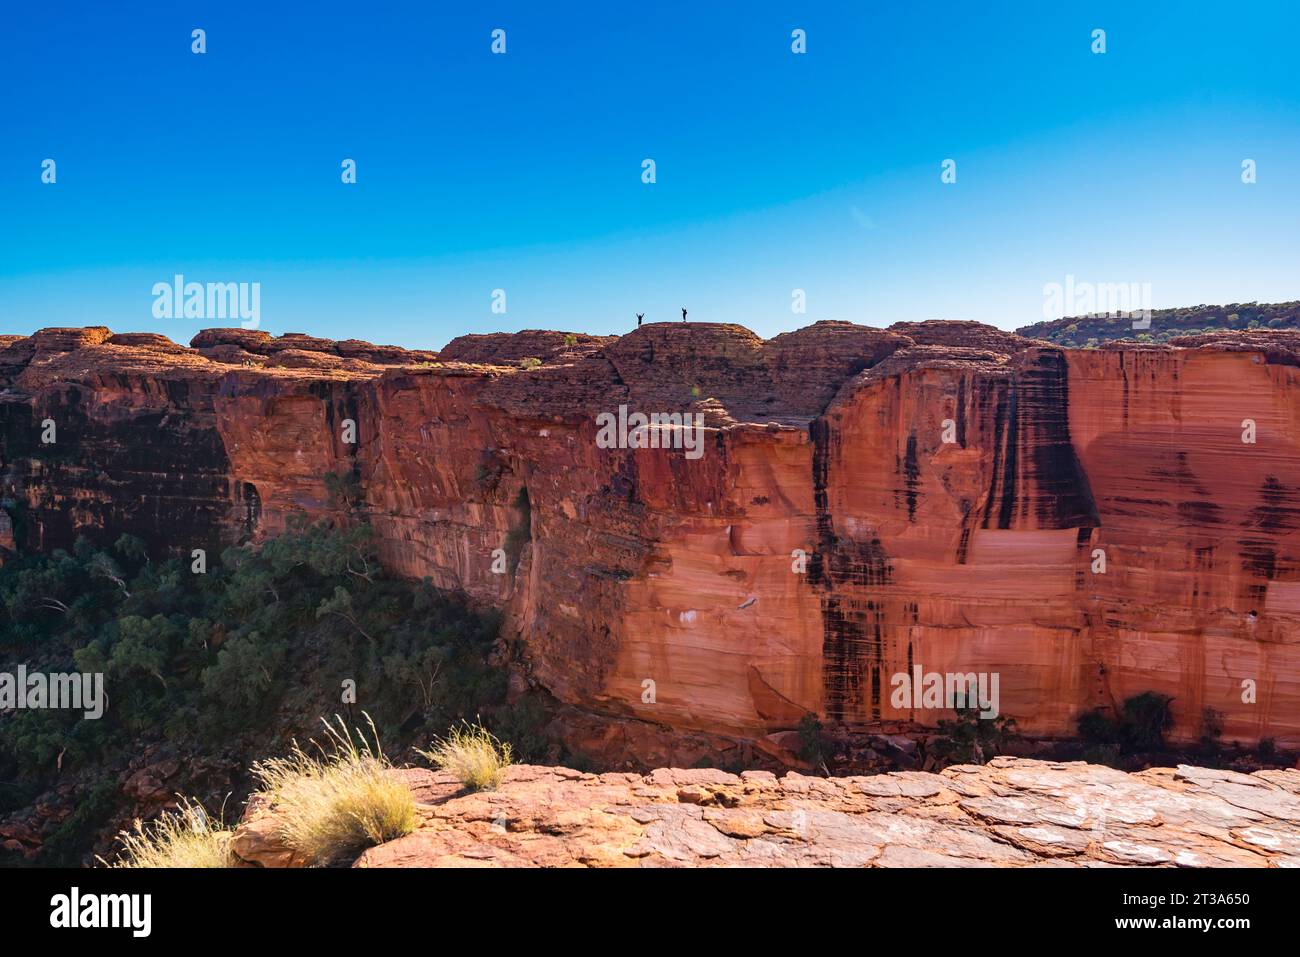 Two men waving from the rock domes near the northern cliff wall of Kings Canyon (Watarrka) in the Northern Territory of Australia Stock Photo